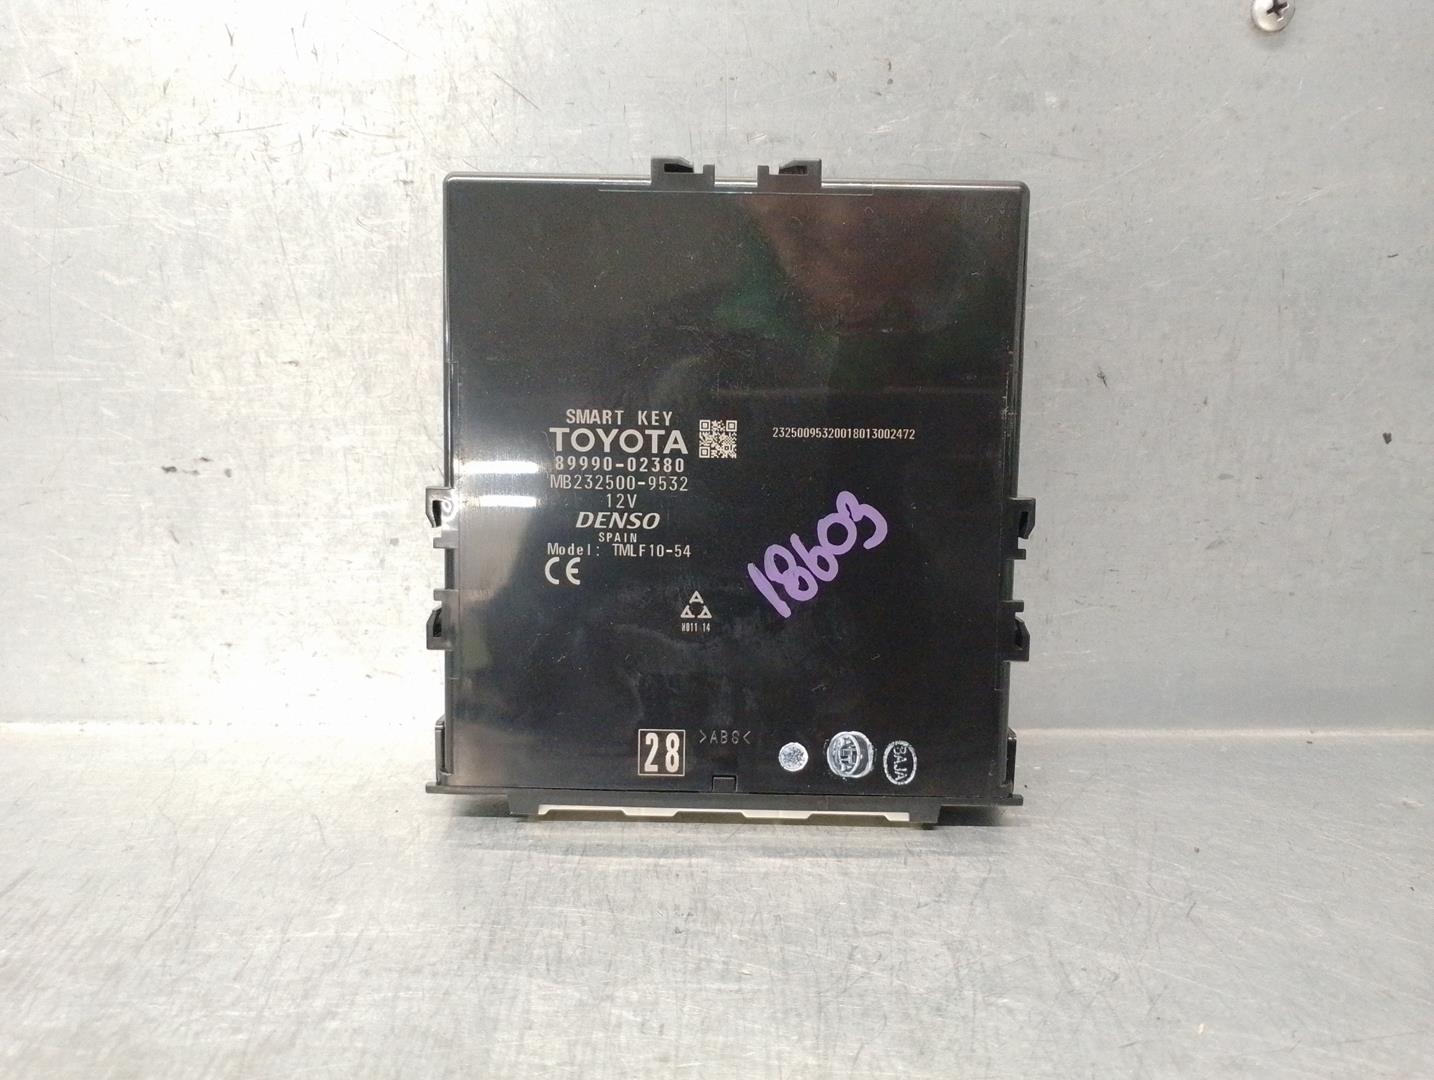 TOYOTA Auris 2 generation (2012-2015) Other Control Units 8999002380, MB2325009532, DENSO 21727189